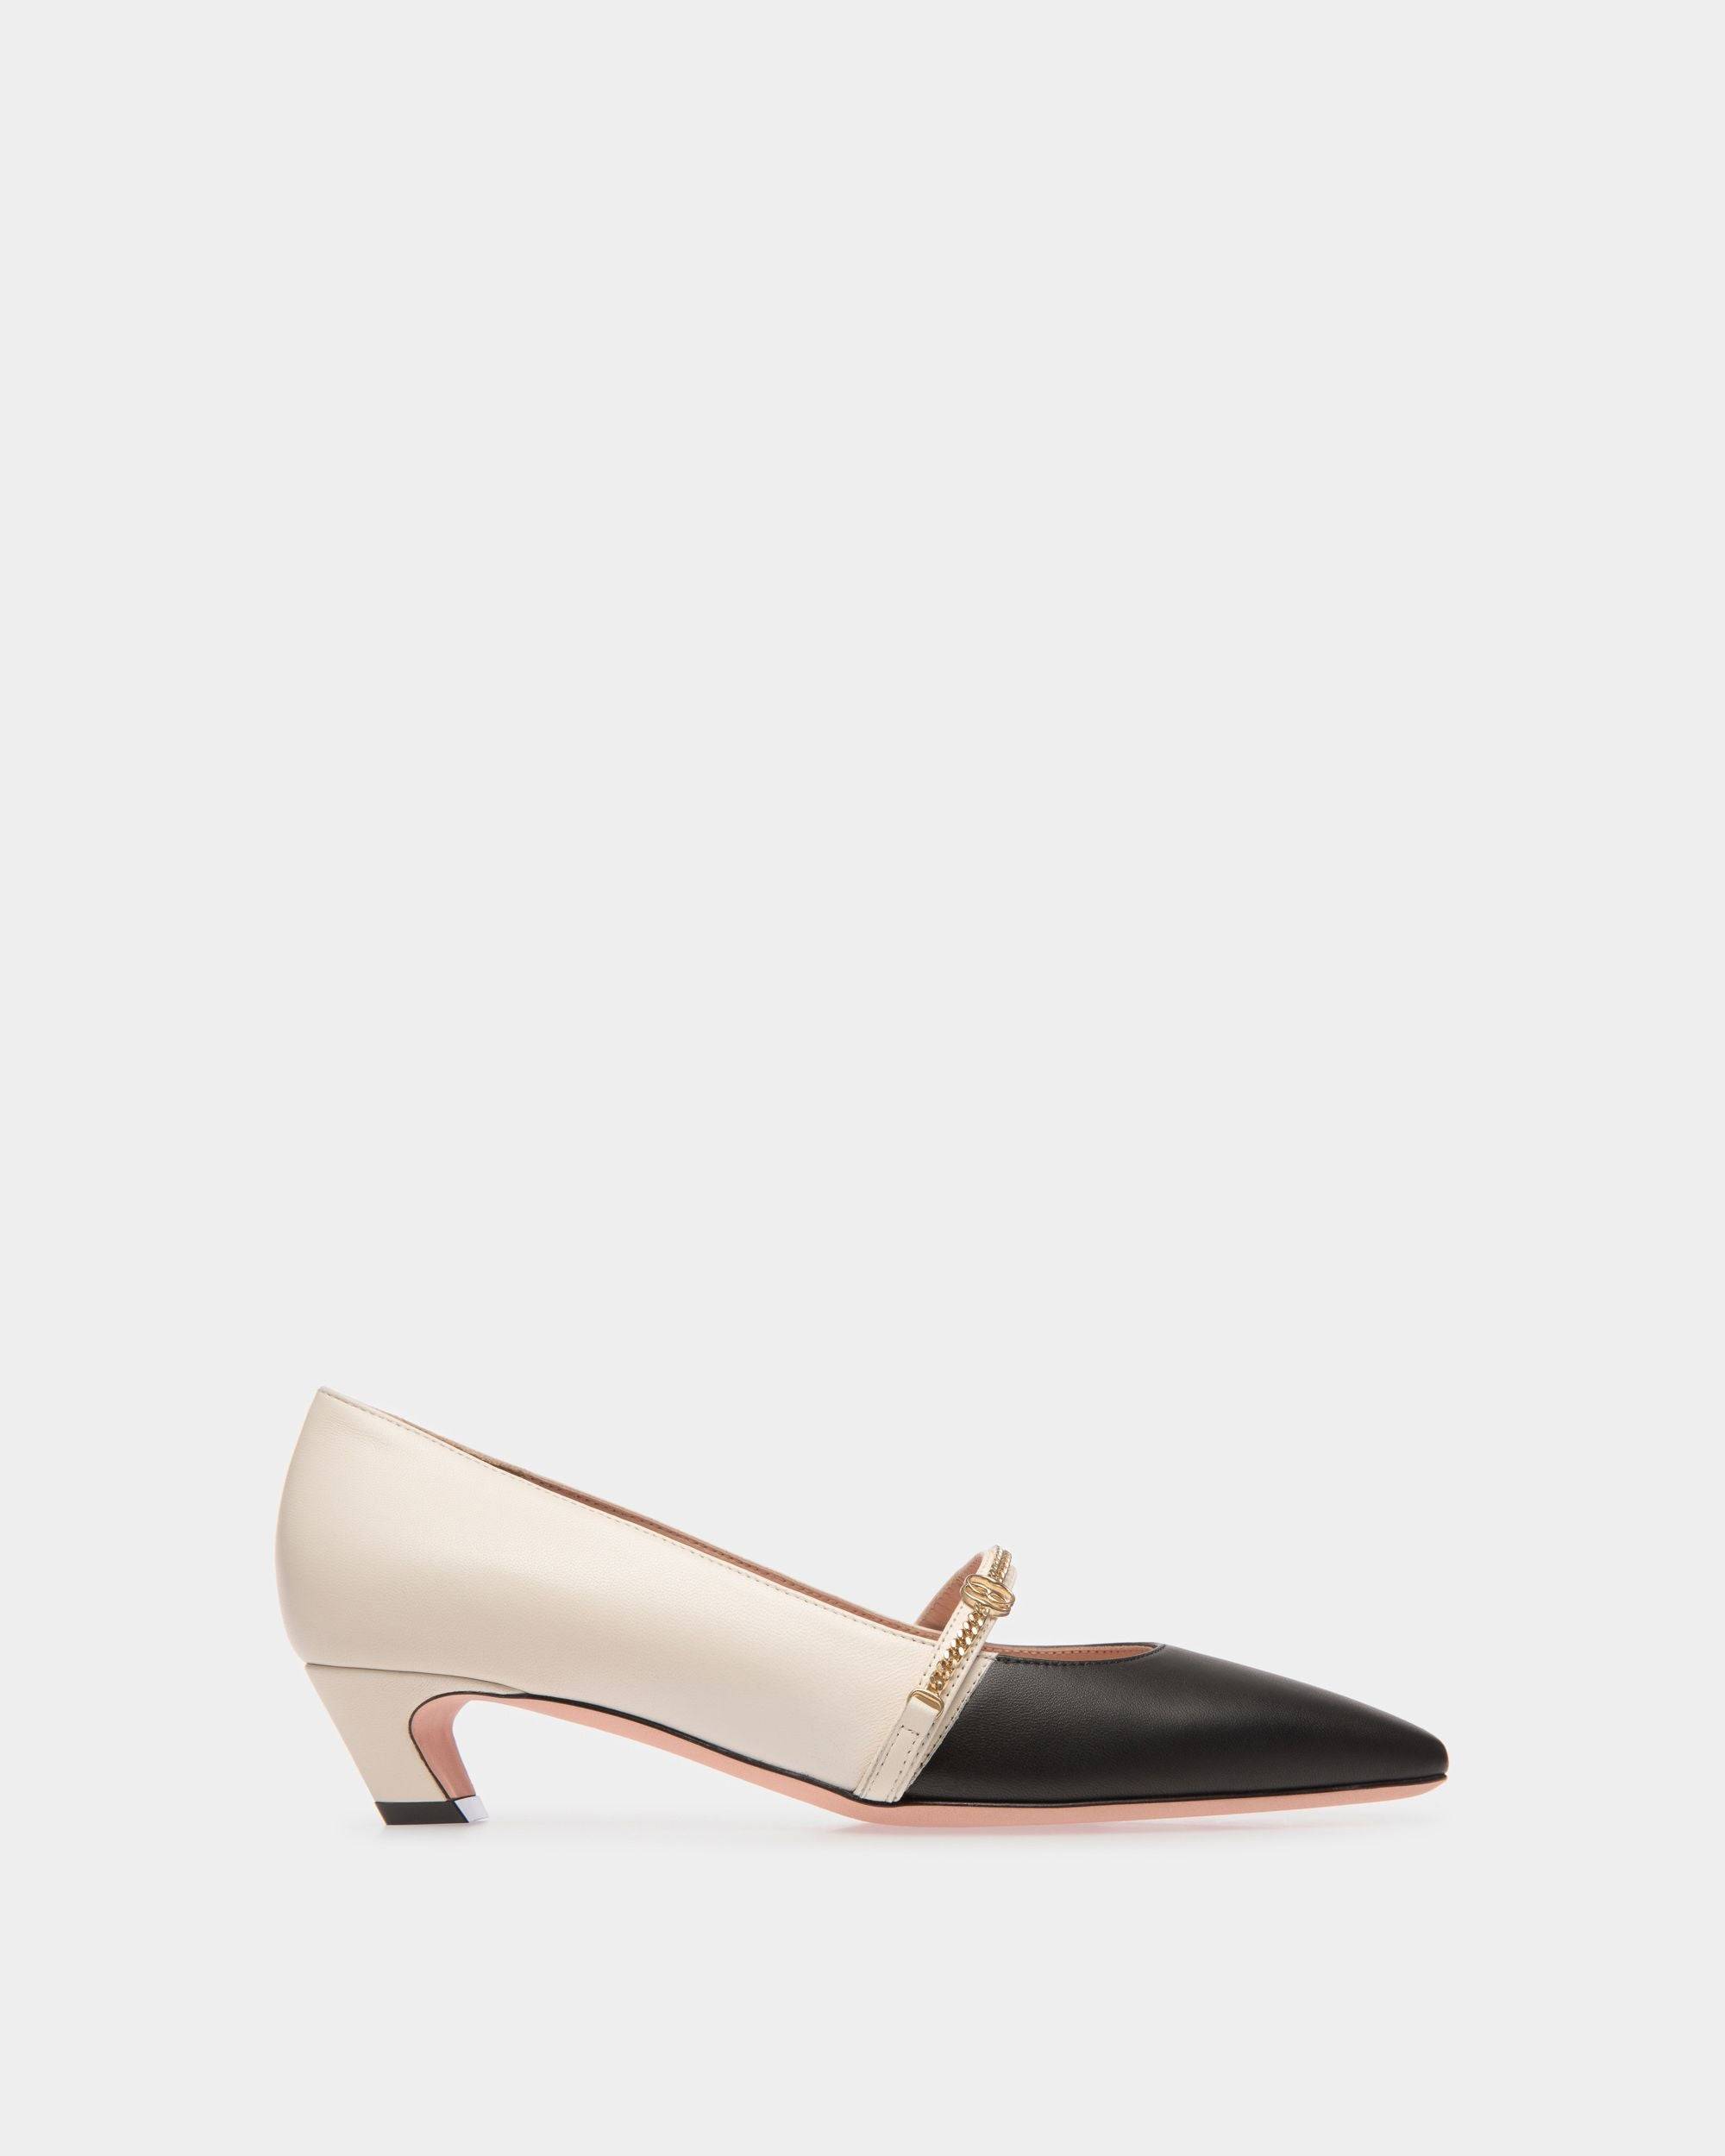 Sylt | Women's Mary-Jane Pump in Black And White Leather | Bally | Still Life Side